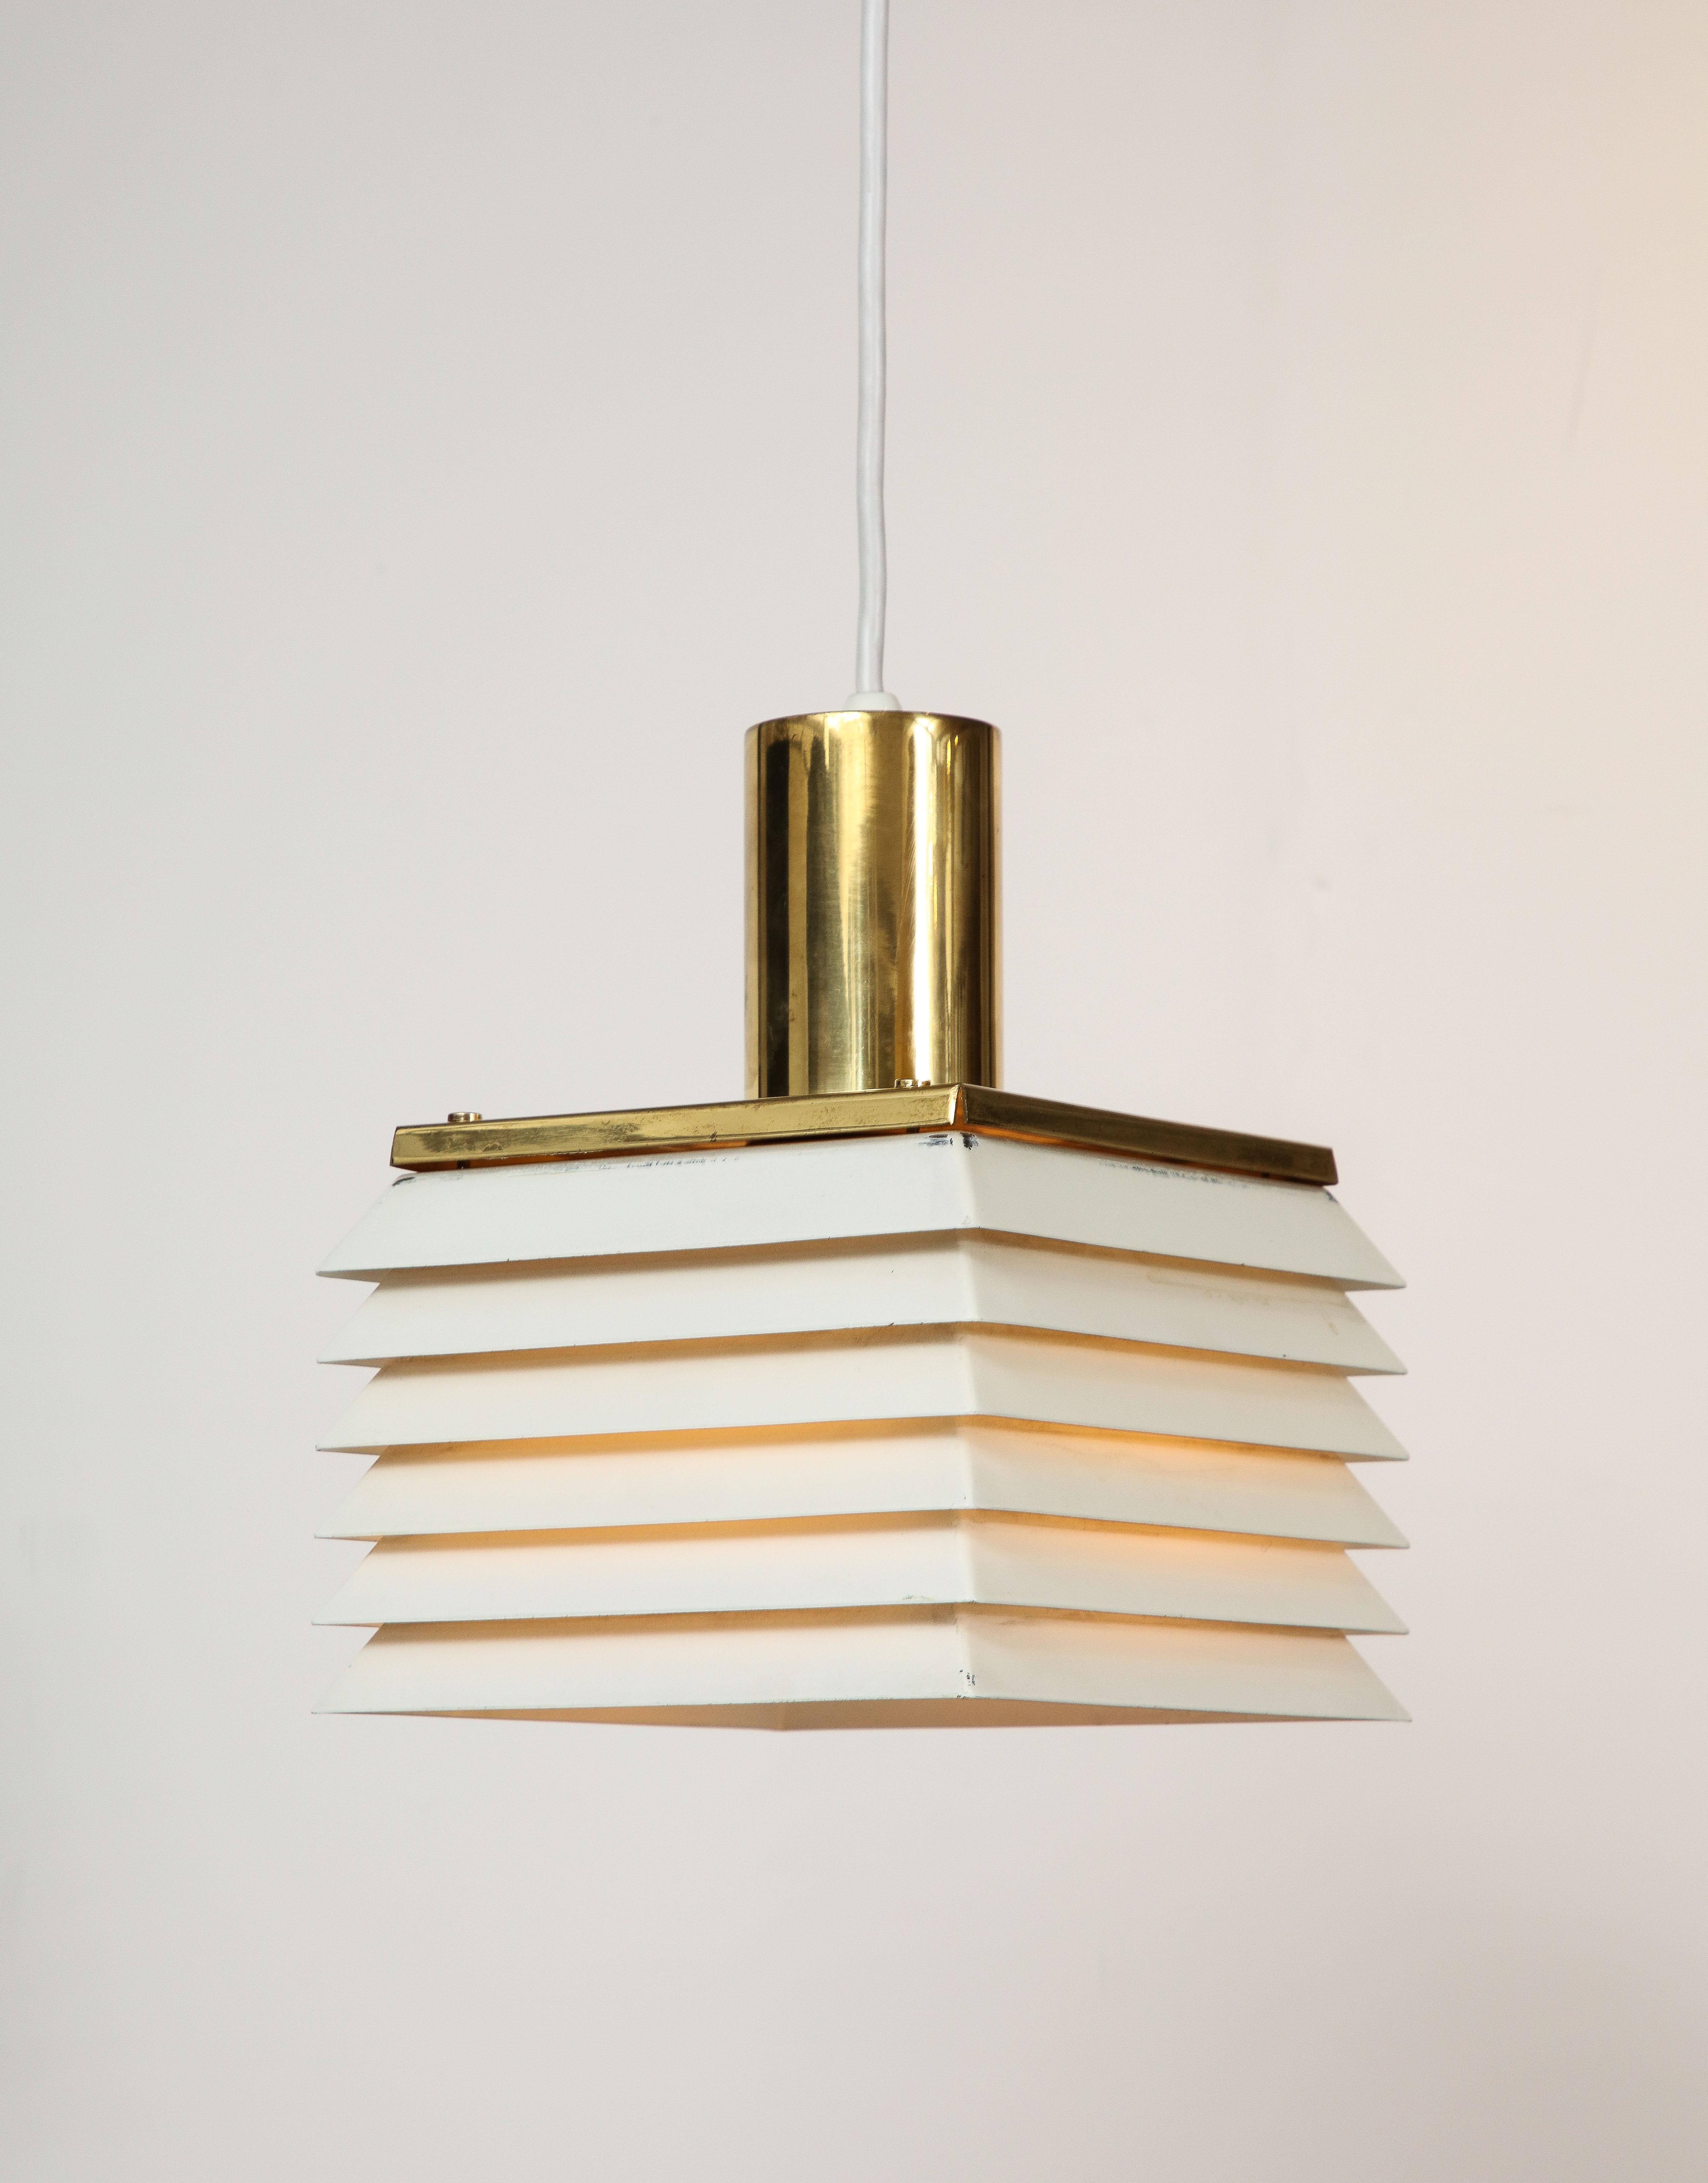 Scarce edition modern light from Hans-Agne Jakobson. Newly wired.

TWO IN STOCK - PAIR IN STOCK